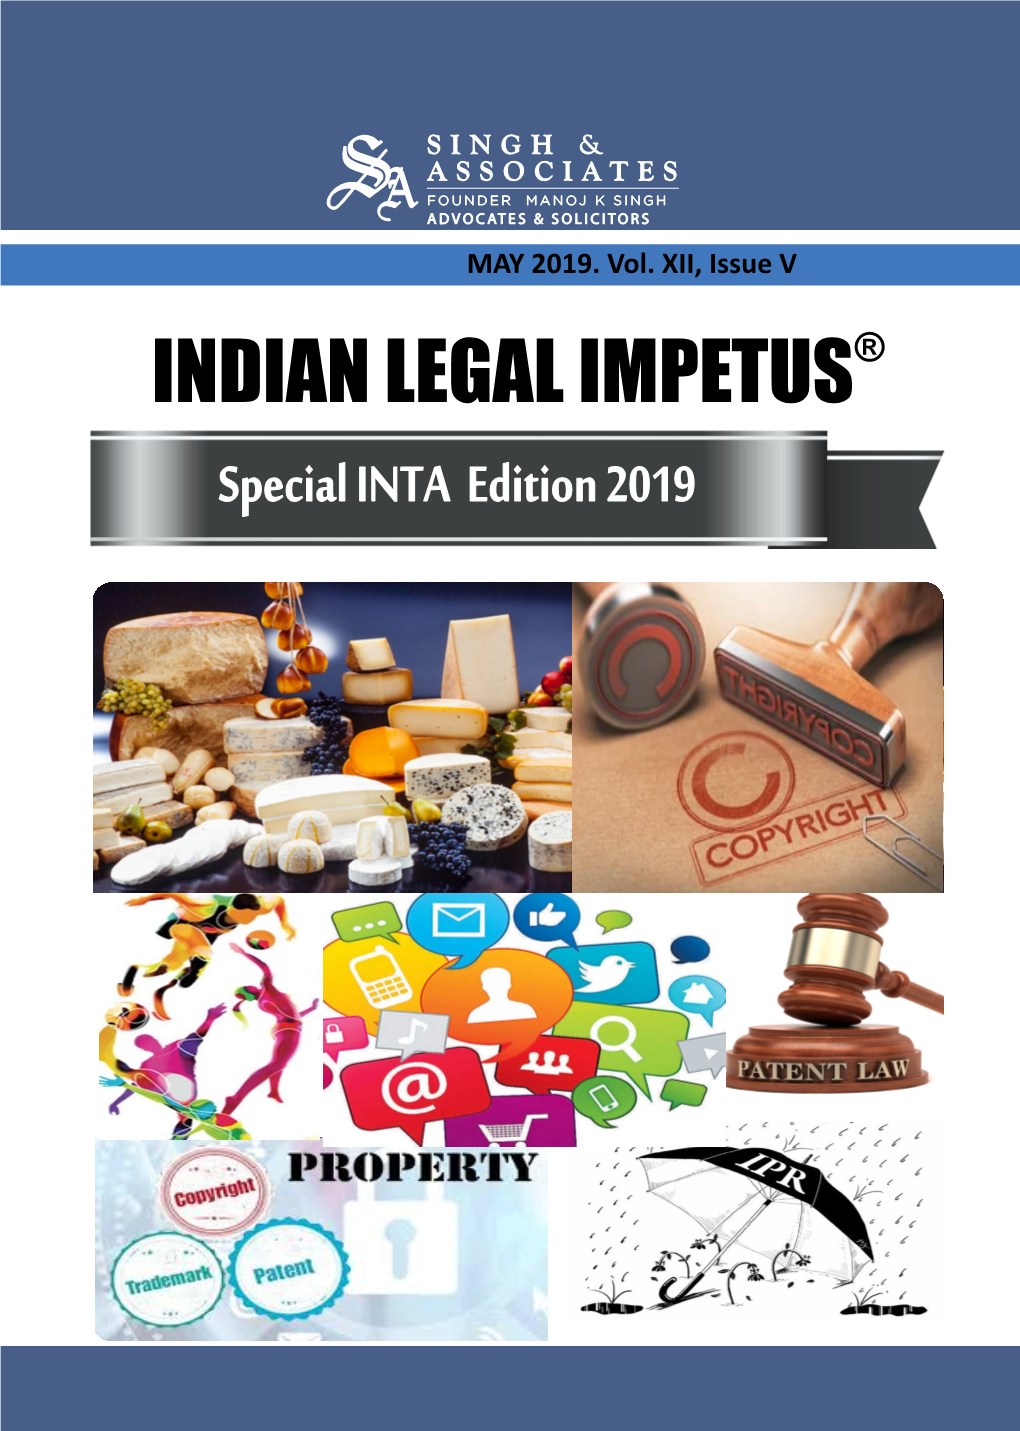 Patent Troll - Patent Against Innovation” with Indian Perspective